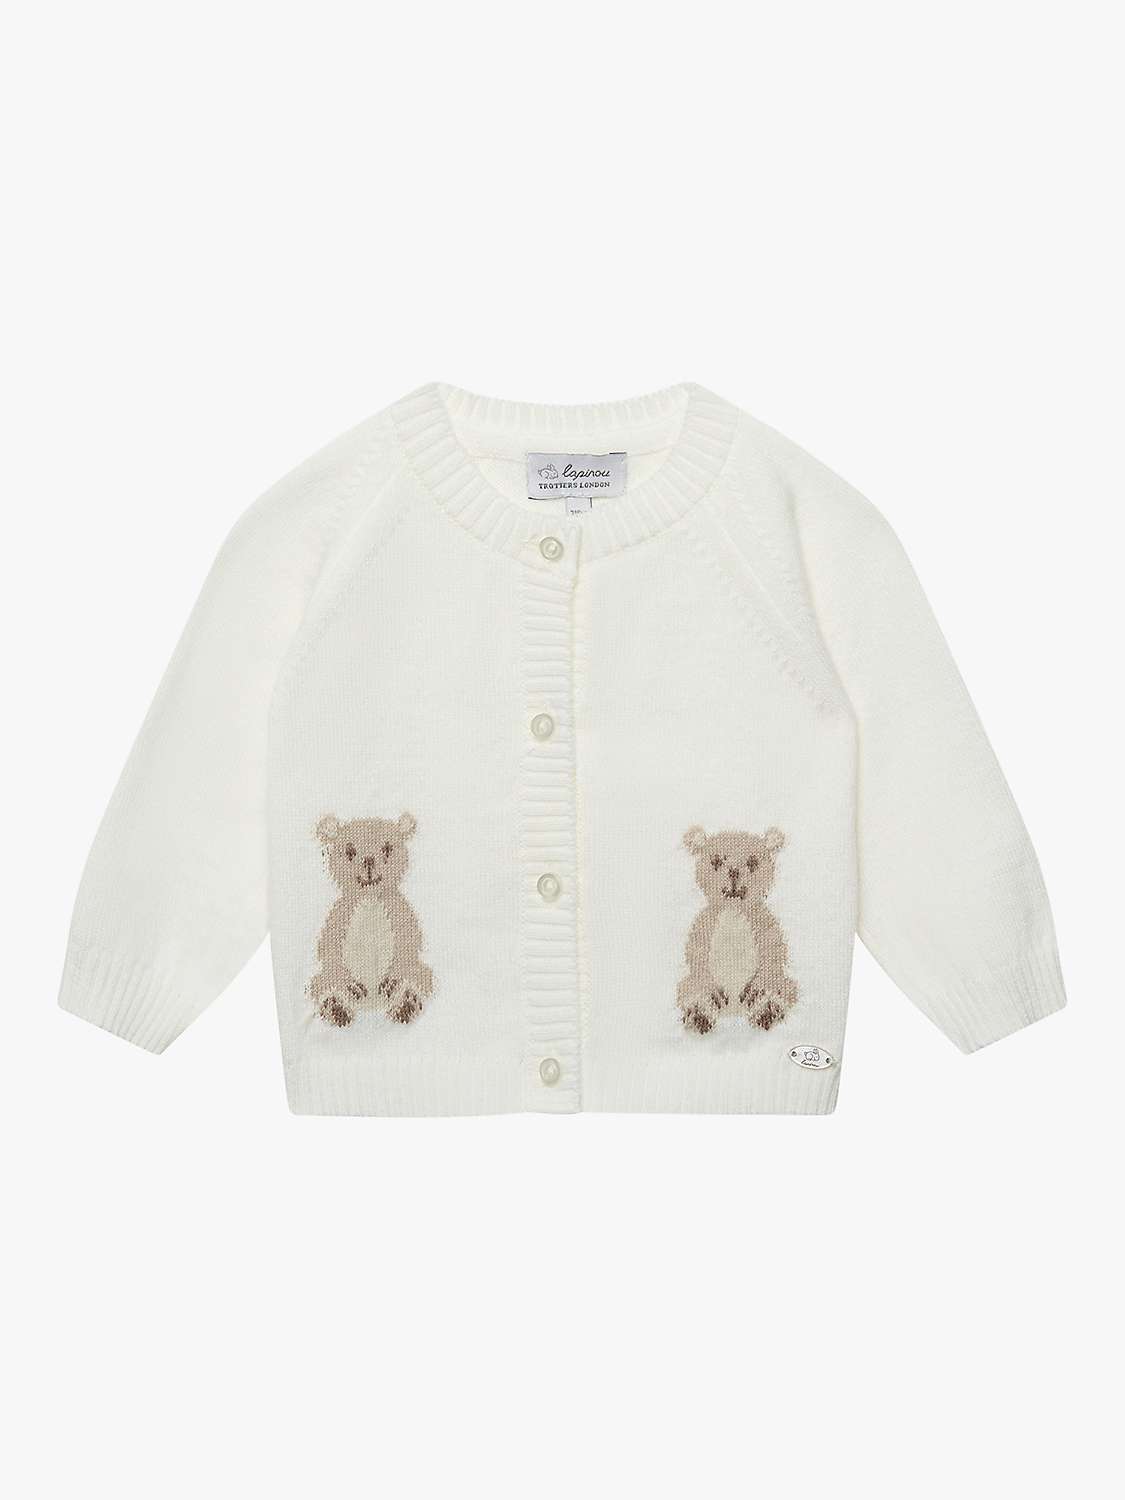 Buy Trotters Baby Teddy Bear Intarsia Wool Blend Cardigan, Off White Online at johnlewis.com